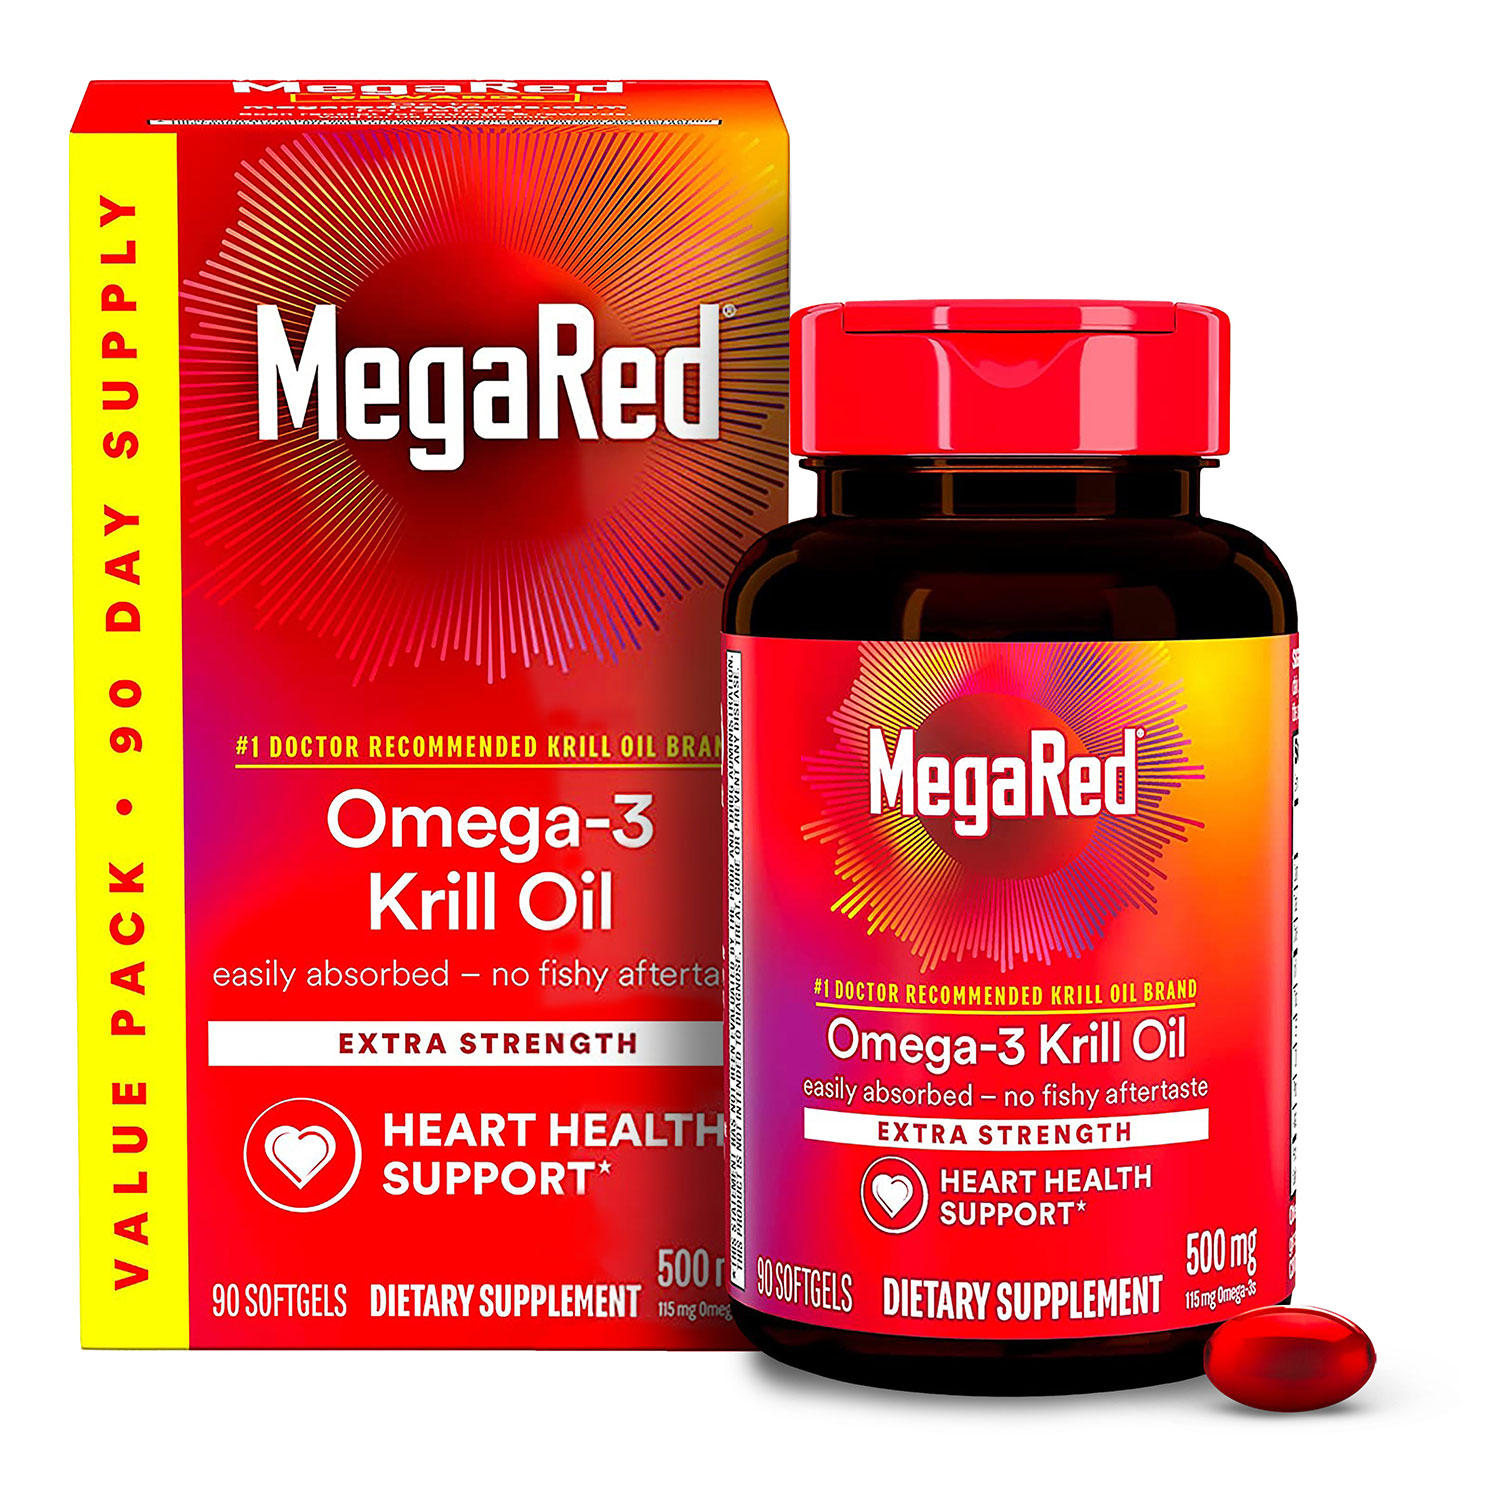 Antarctic Krill Oil 500mg Omega 3 Fatty Acid Supplement, MegaRed Extra Strength EPA & DHA Krill Oil Softgels (90cnt box), Antioxidant Astaxanthin, Heart Health Supplement With No Fish Oil Aftertaste